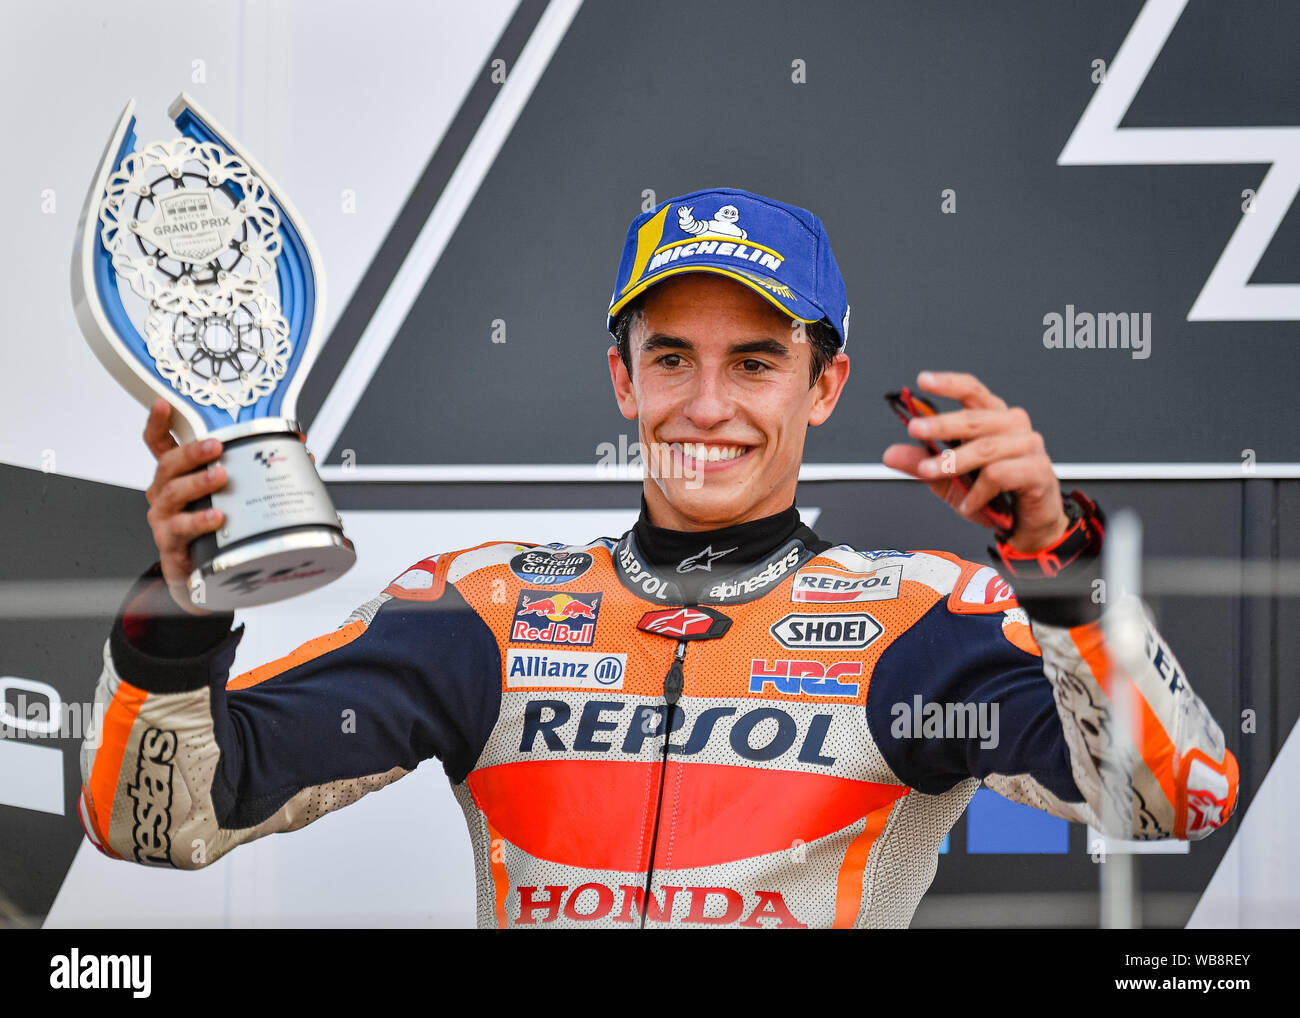 Towcester, UK. 25th Aug, 2019. Marc Marquez (SPA) of Repsol Honda Team at the Winner’s Presentation of GoPro British Grand Prix at Silverstone Circuit on Sunday, August 25, 2019 in TOWCESTER, ENGLAND. Credit: Taka G Wu/Alamy Live News Stock Photo